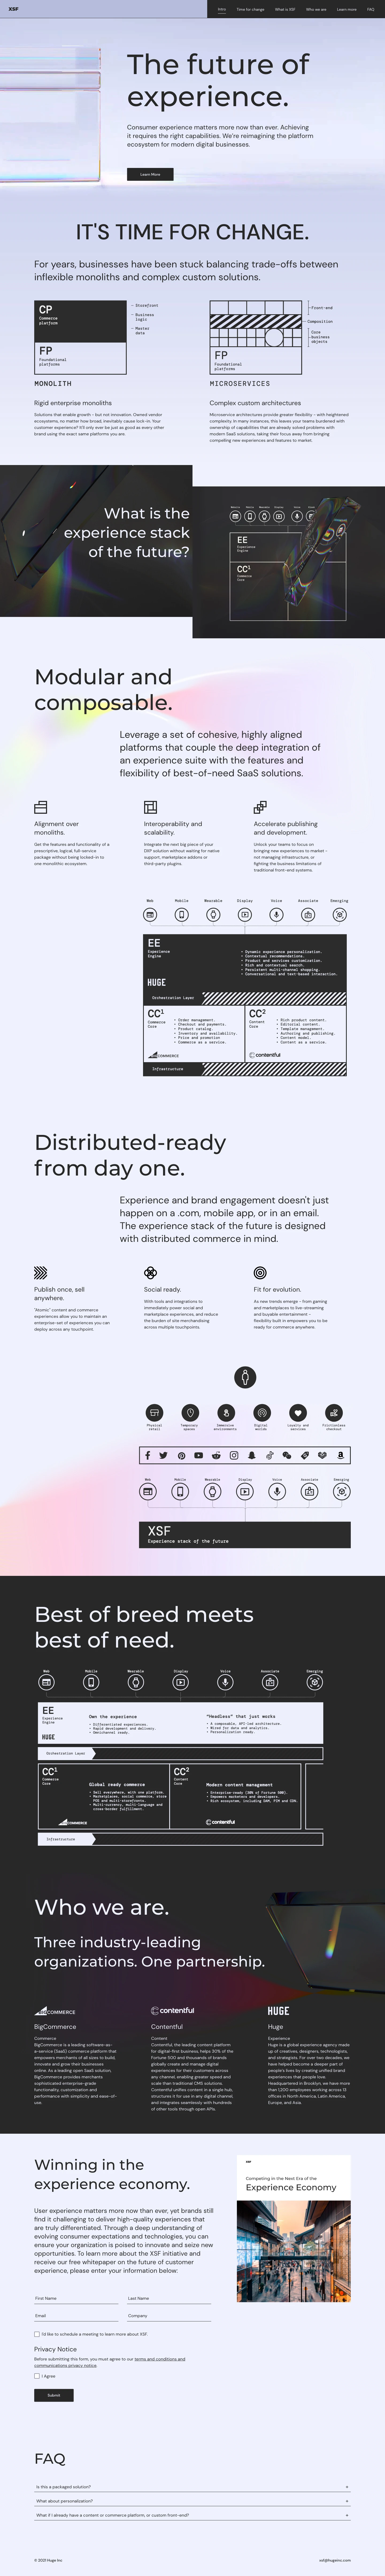 XSF Landing Page Example: The experience stack of the future (XSF) is a platform ecosystem for modern businesses to innovate on digital customer experience.